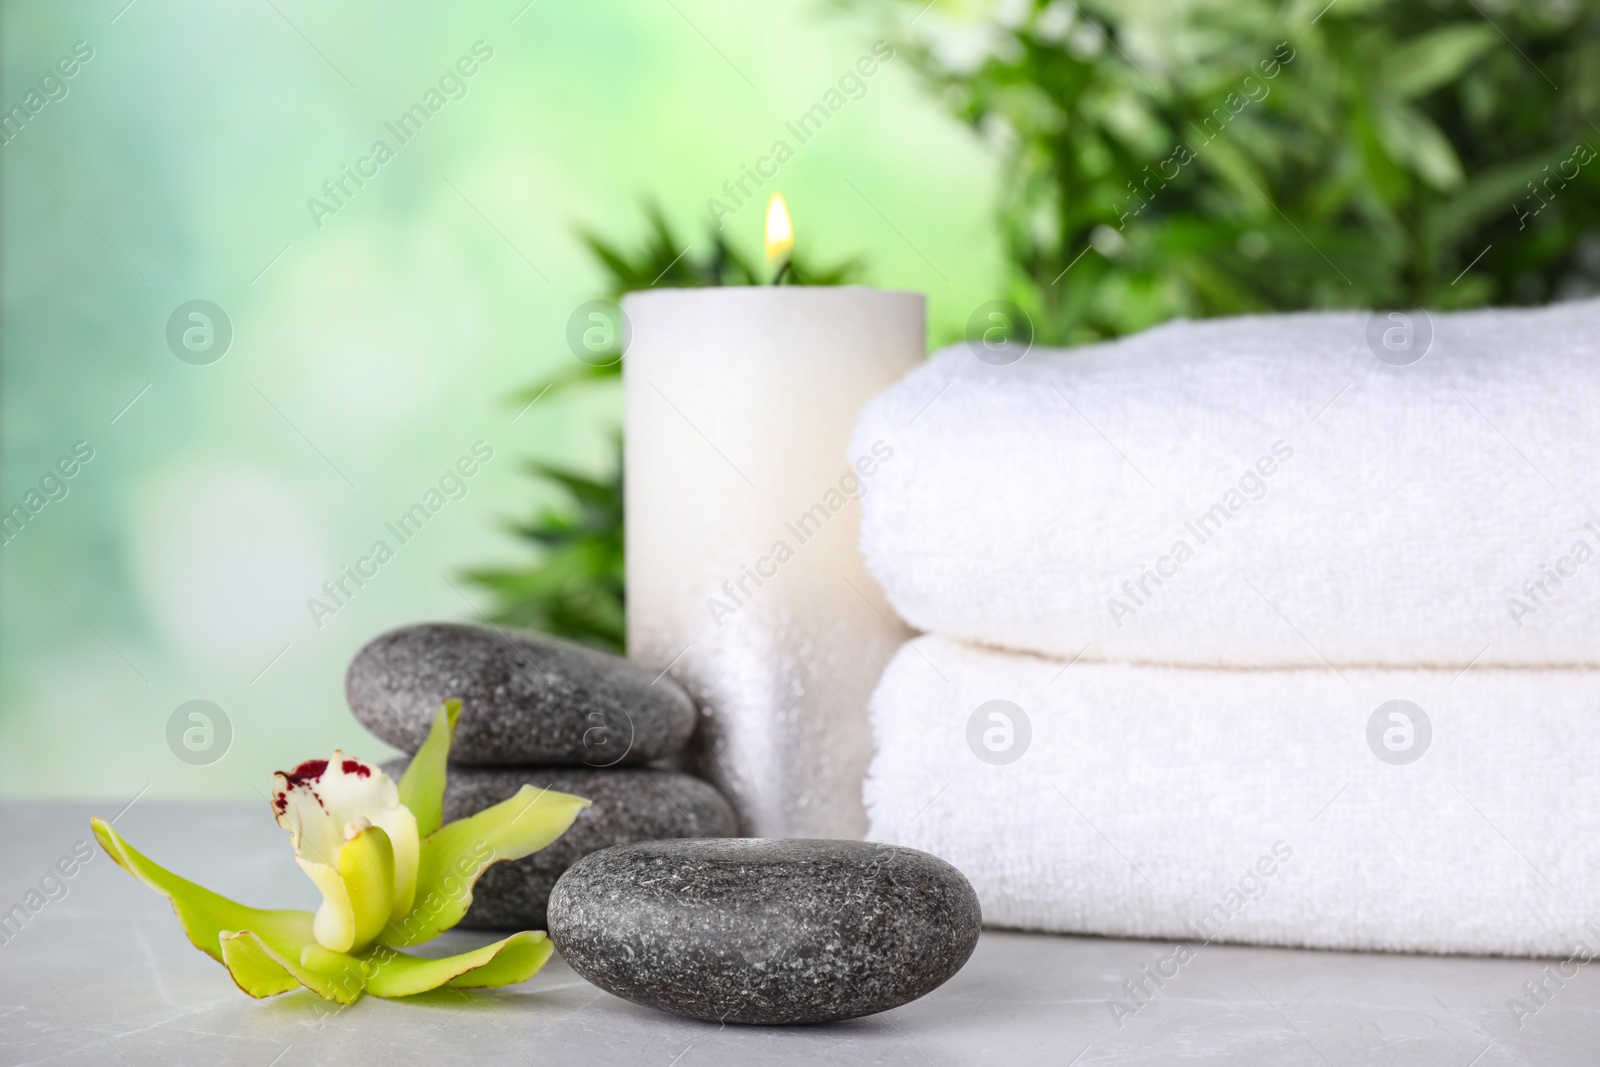 Photo of Exotic flower, spa stones, candle and towels on grey table against blurred green background, space for text